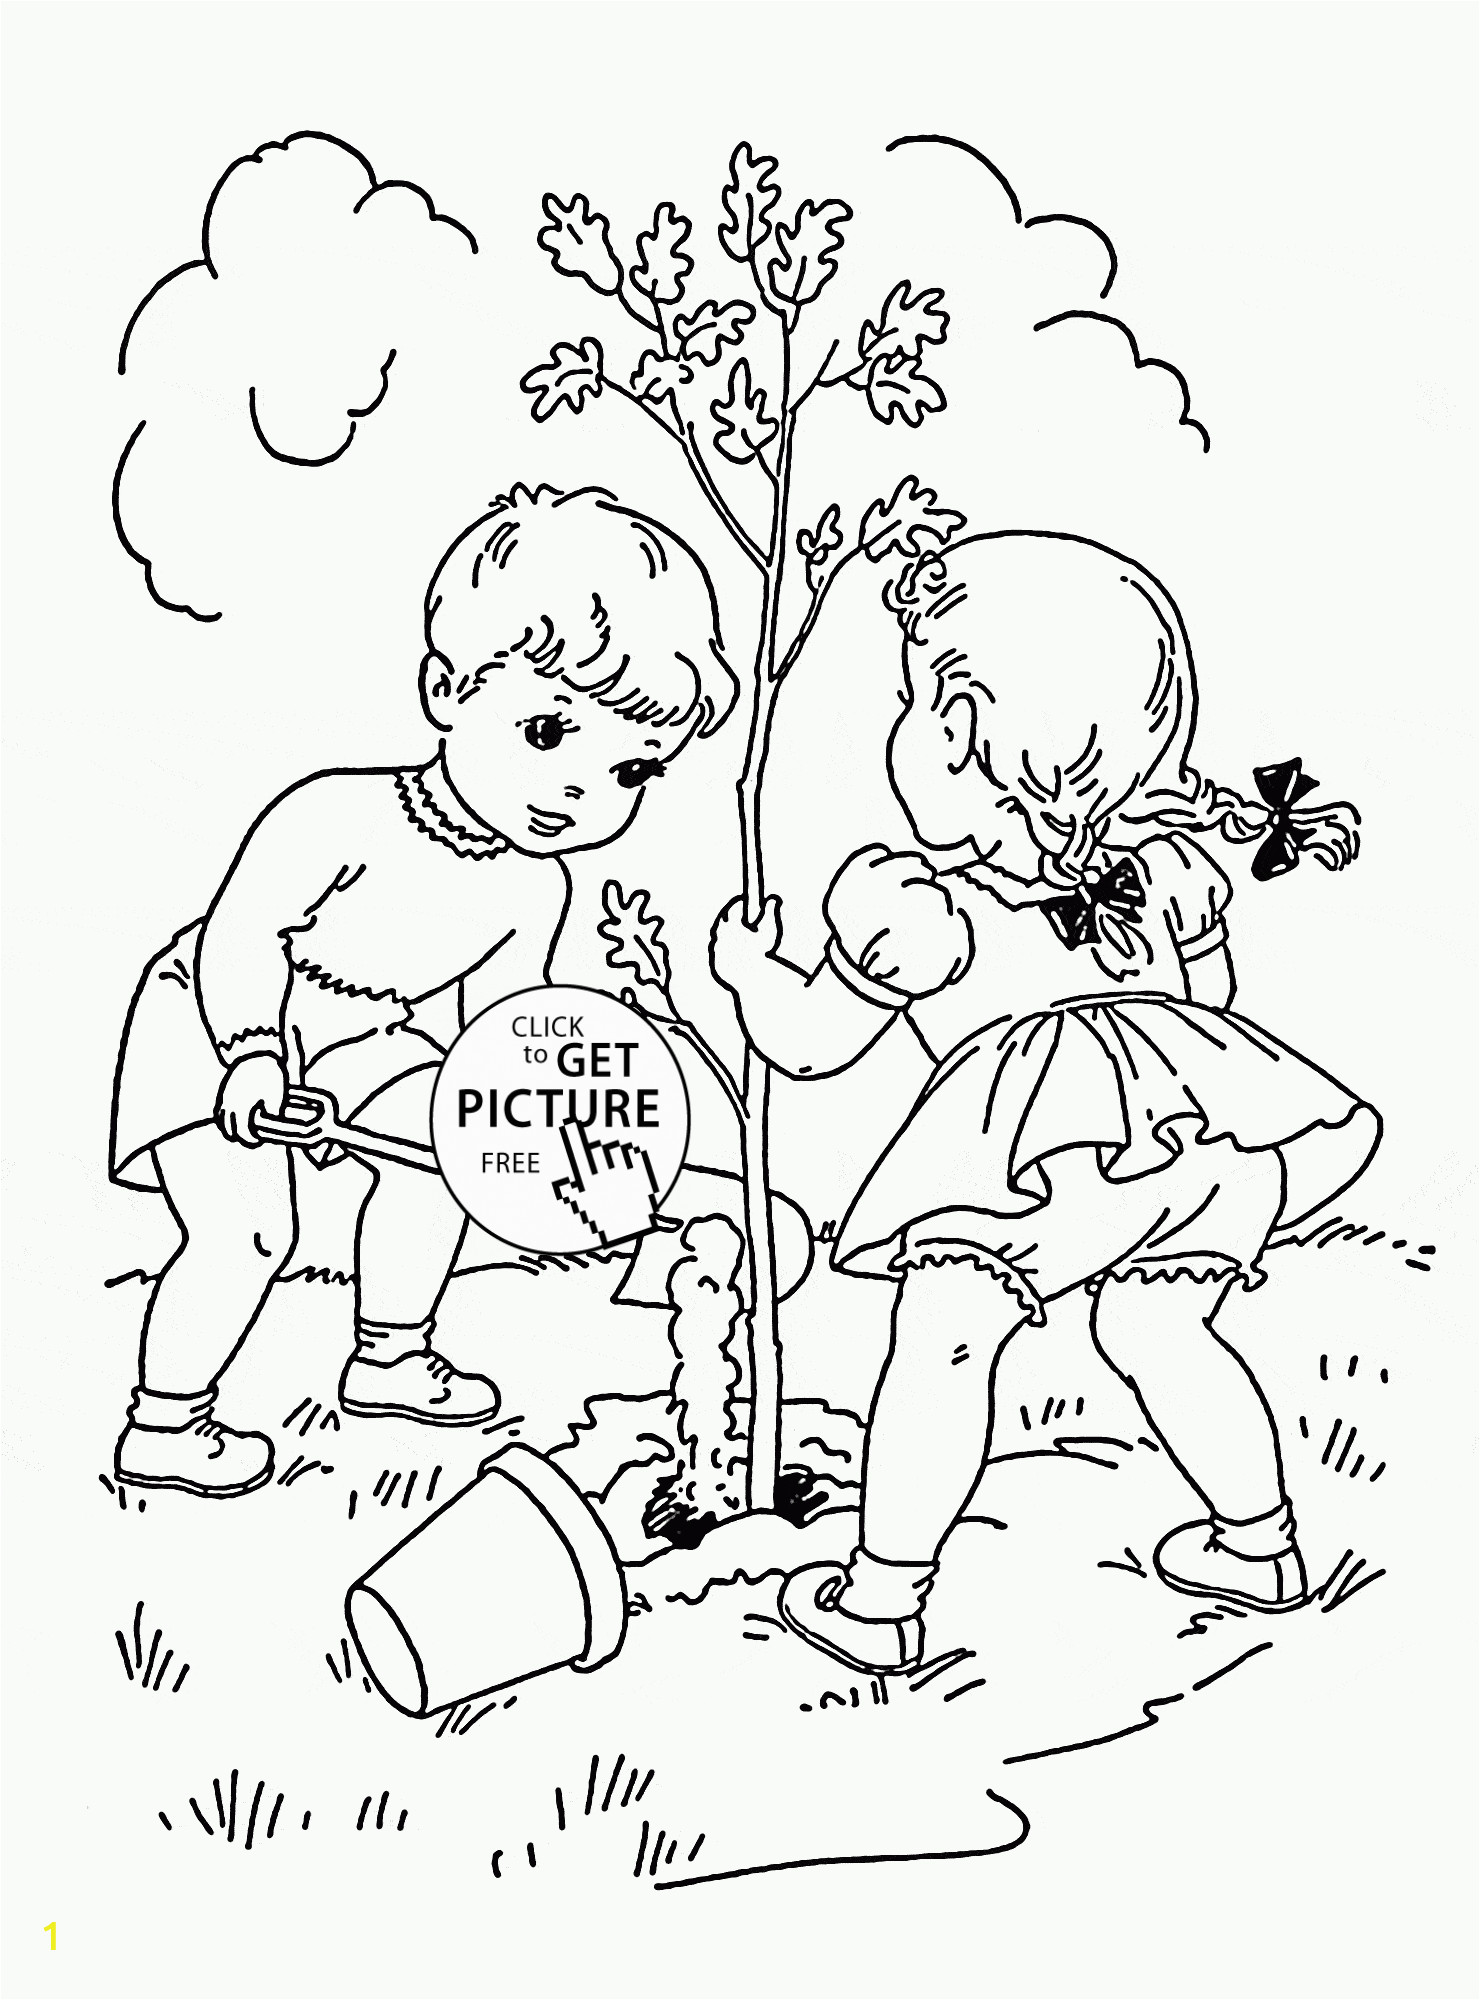 Child Face Coloring Page Children Plant Tree Coloring Page for Kids Spring Coloring